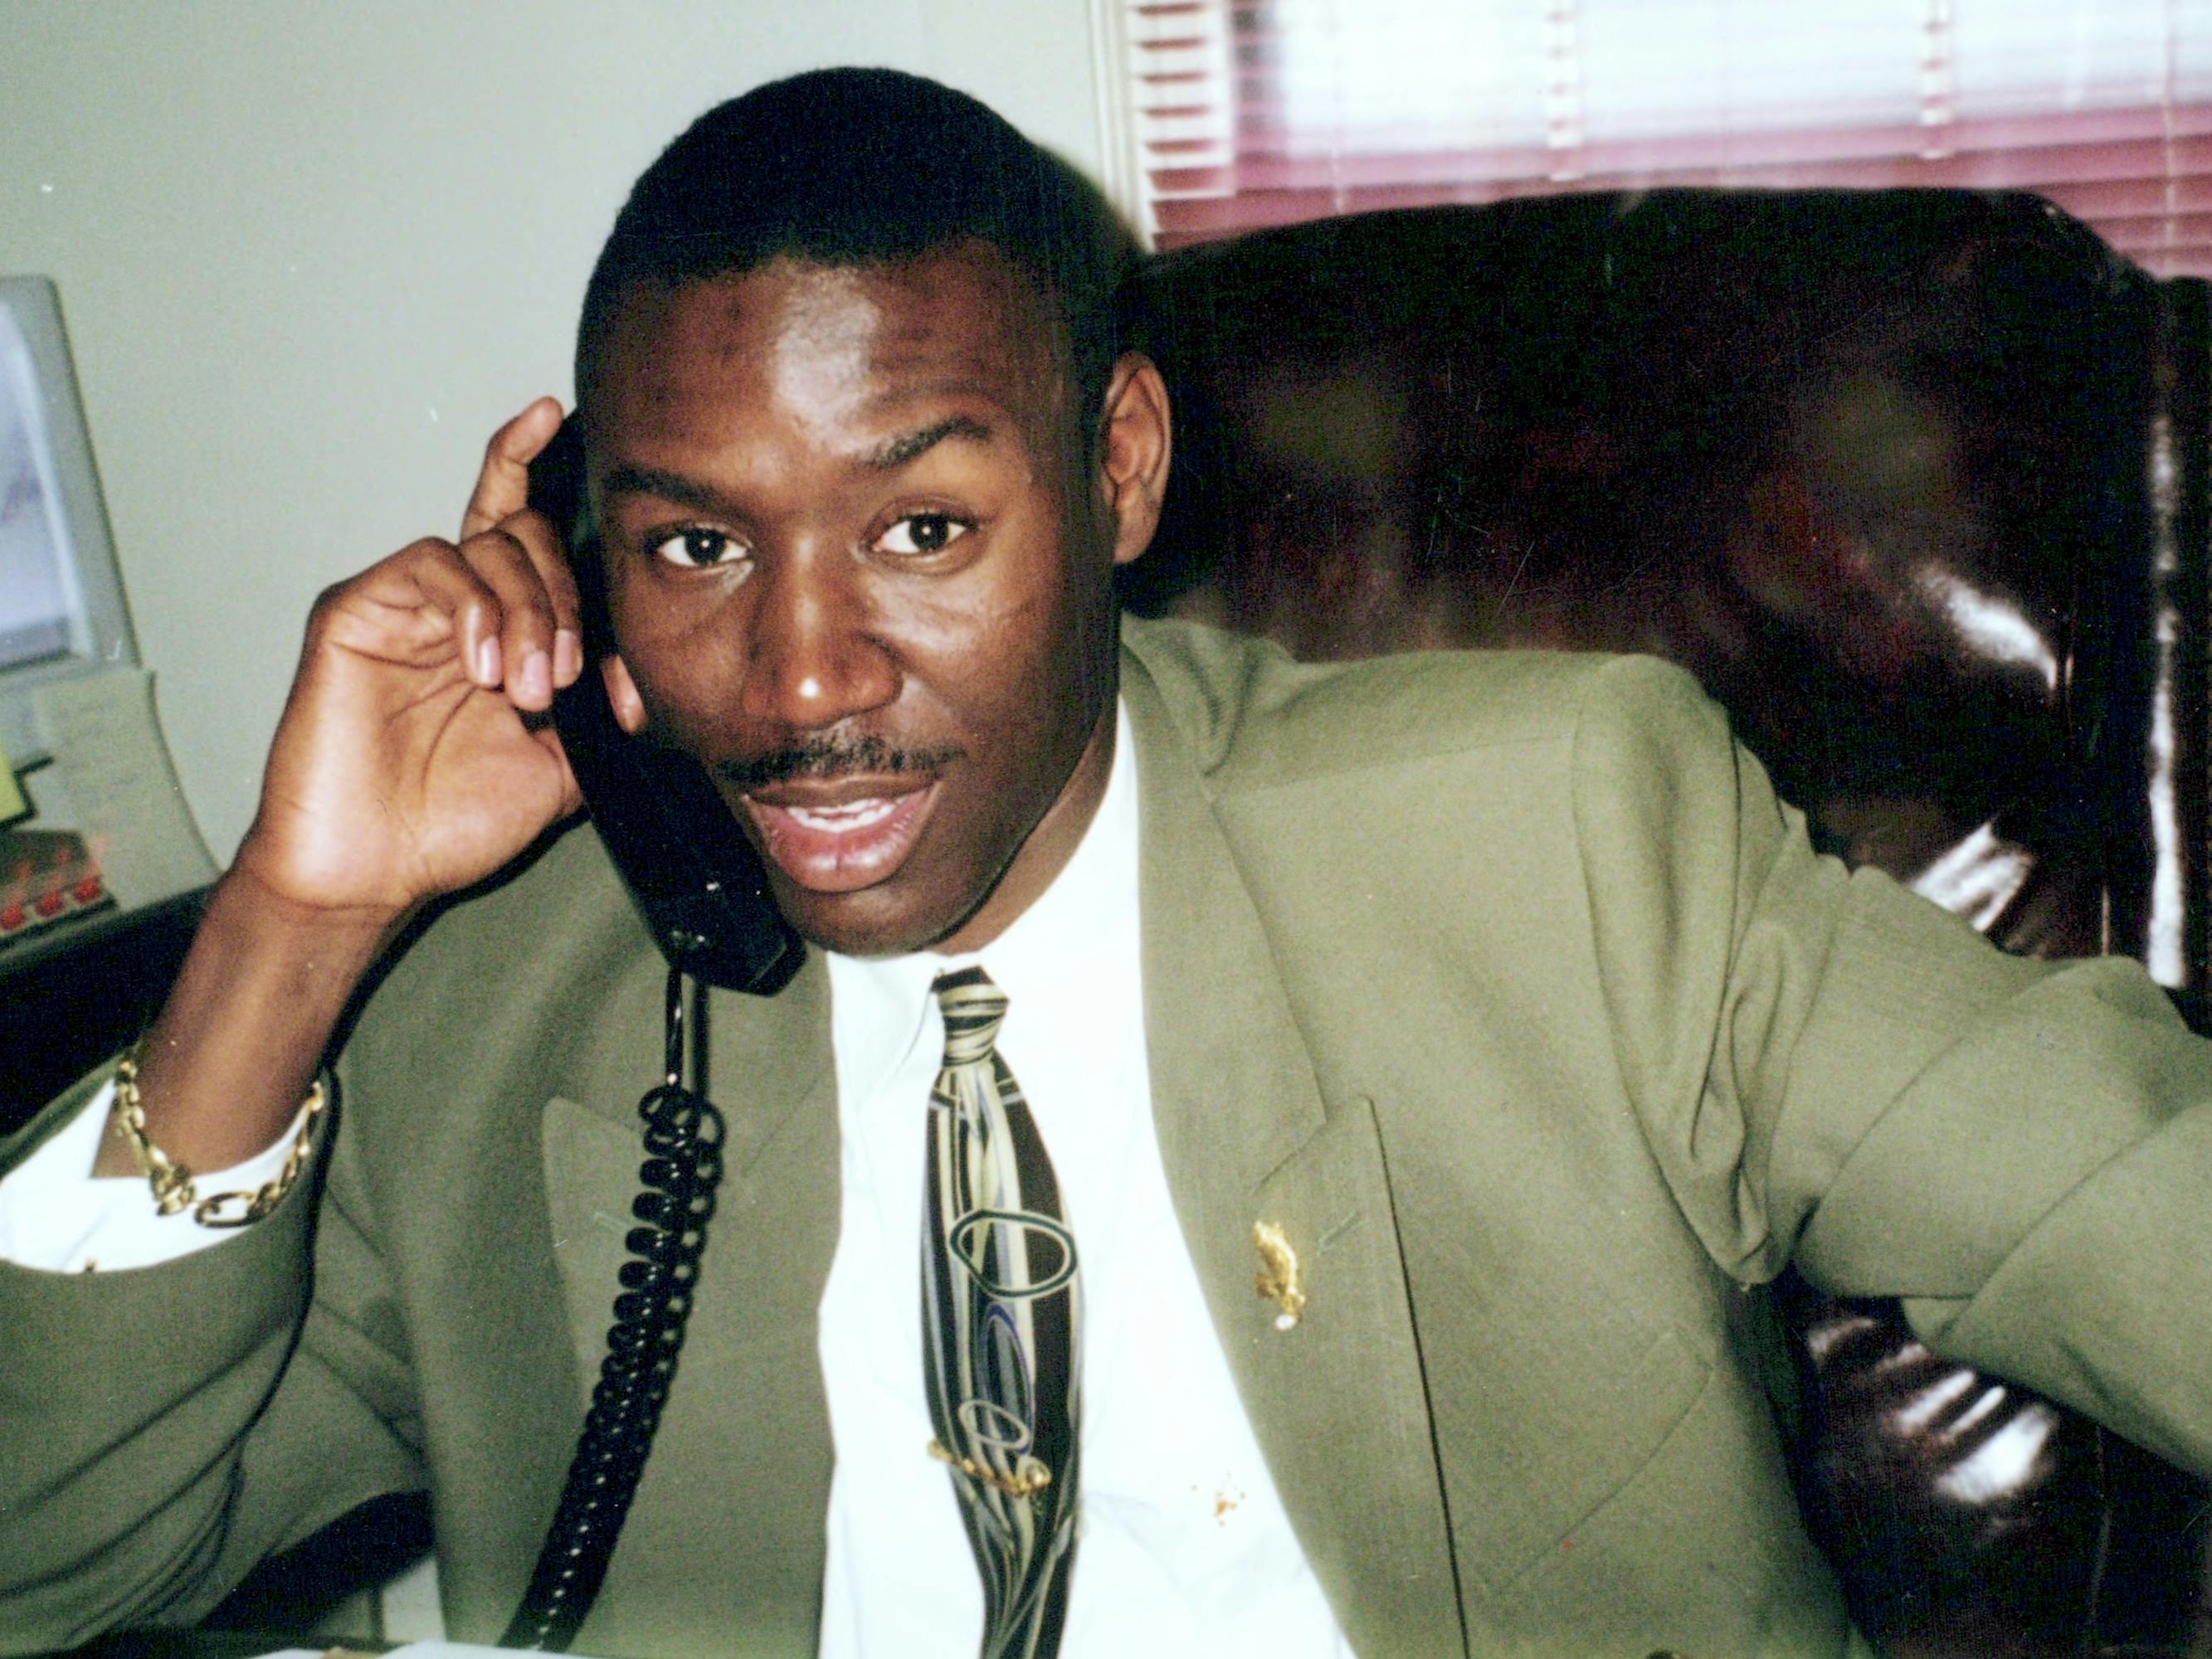 A young Ben Crump wears a green blazer and tie and looks suave!